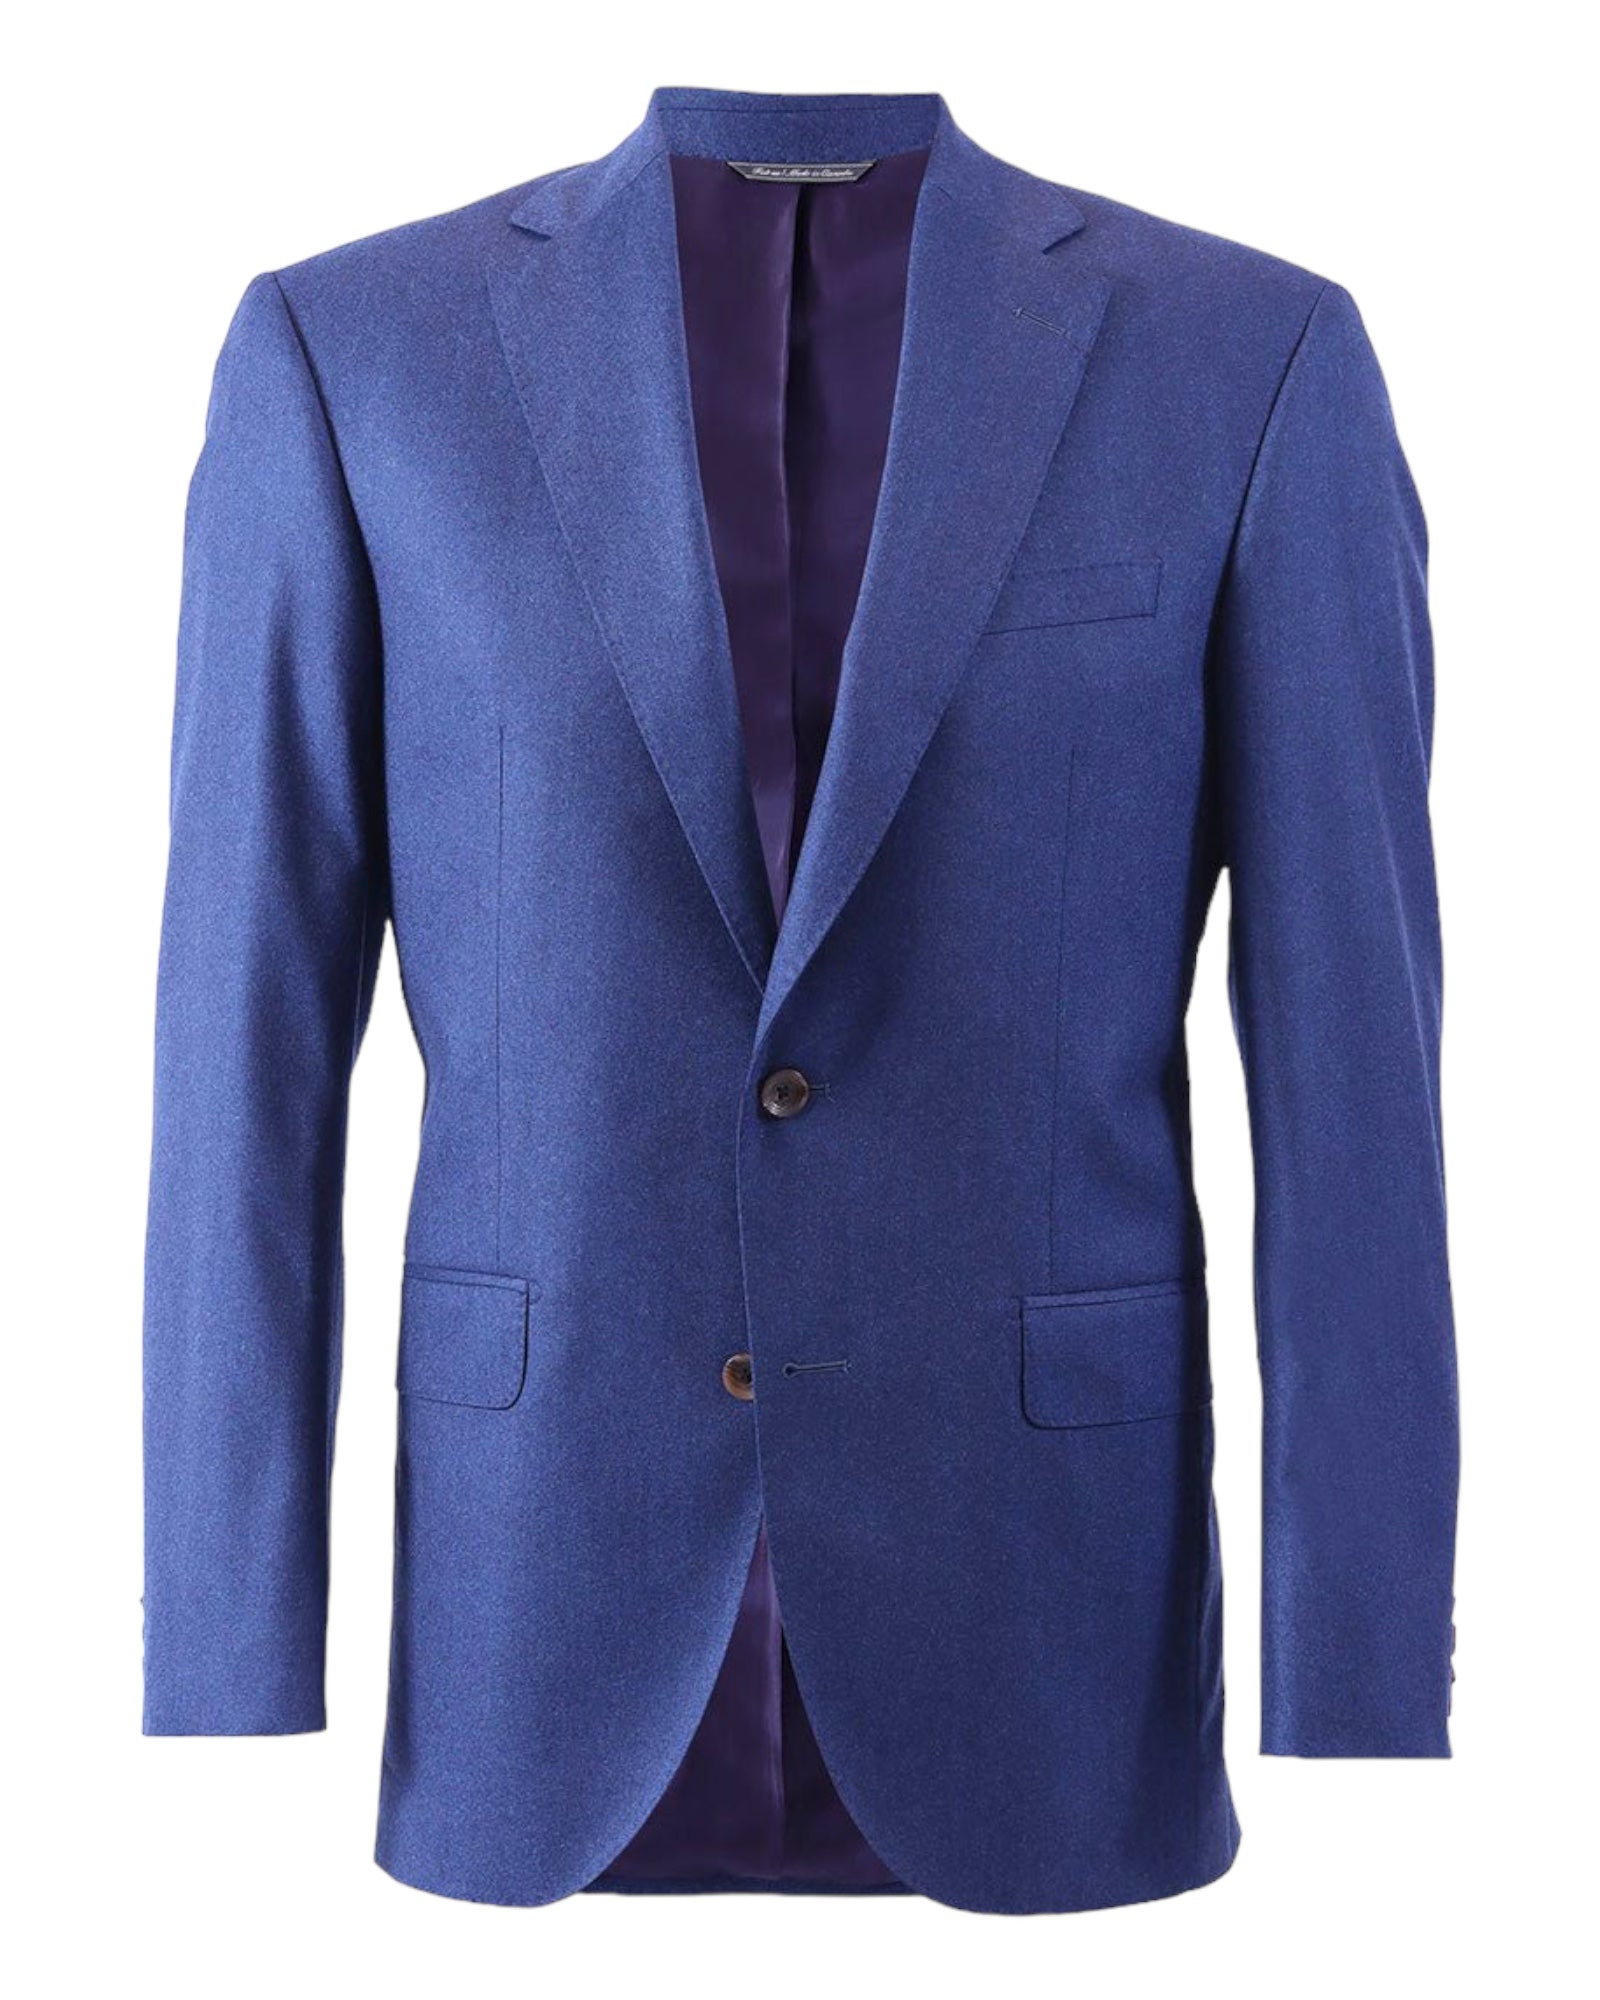 Wool and Cashmere Suit - Blue Steel SUITS40R